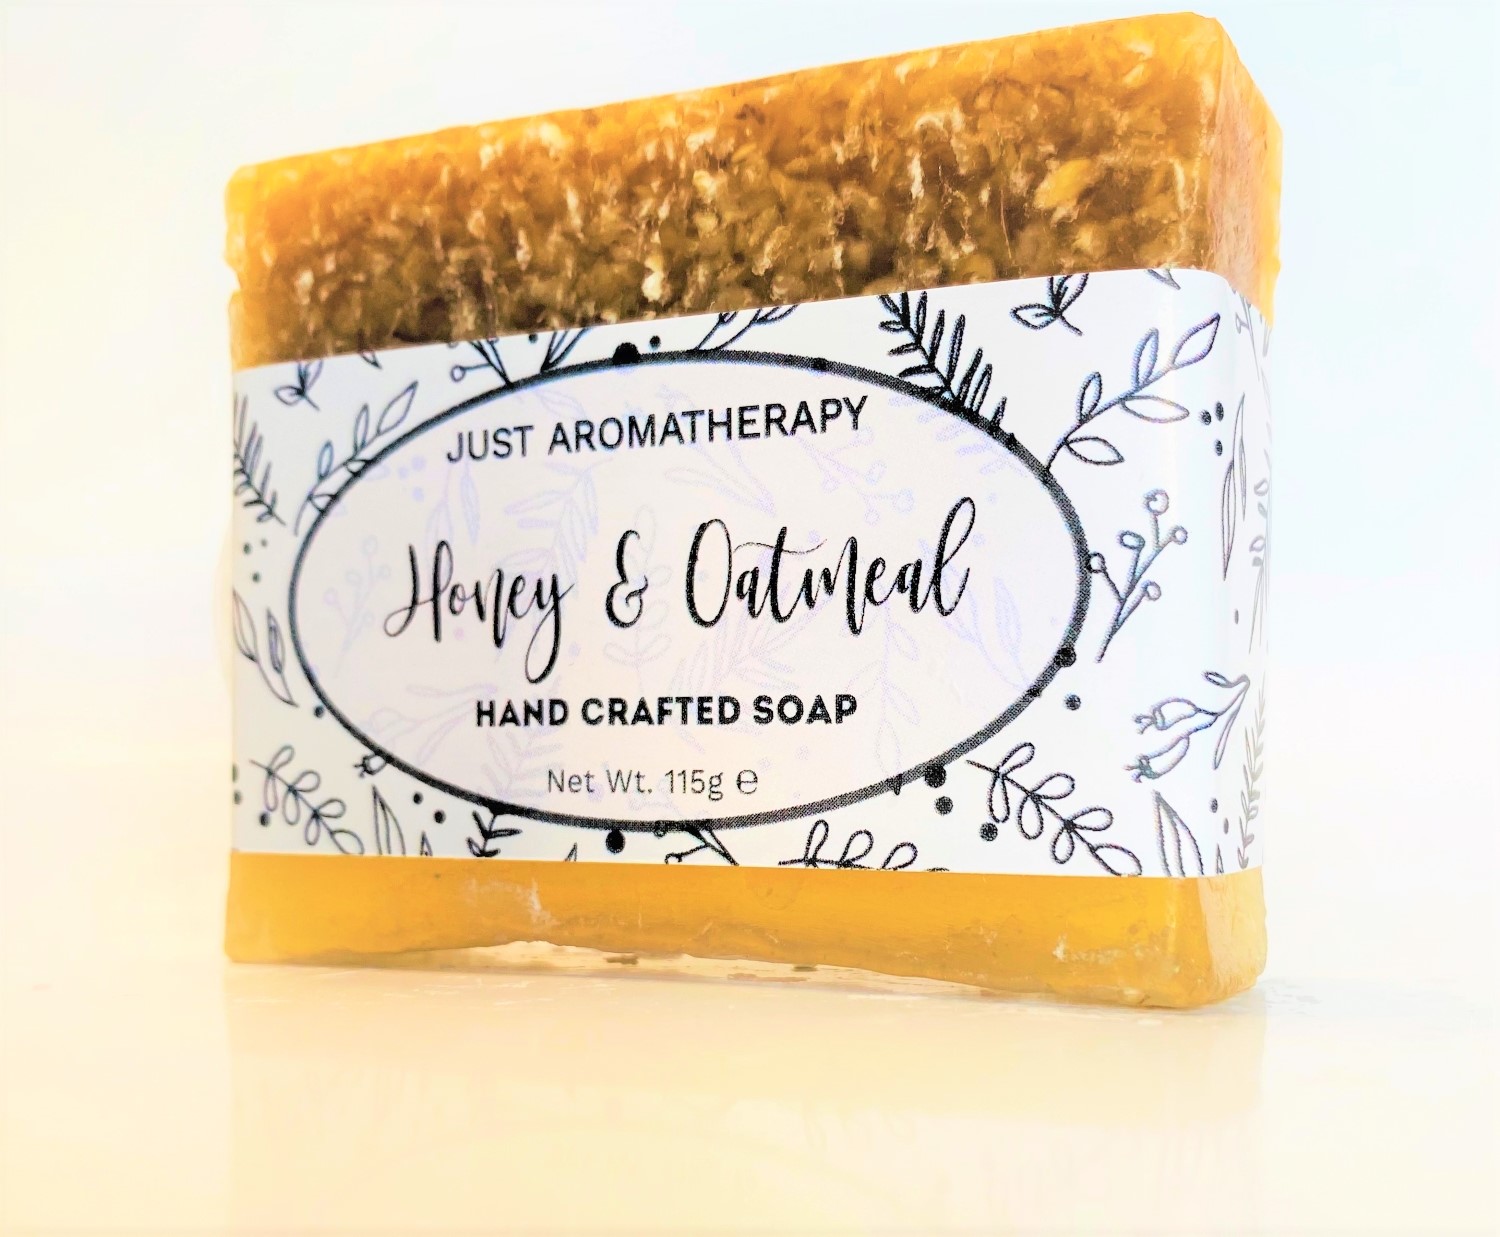 Honey & Oatmeal - Wild & Natural Hand Crafted Soap